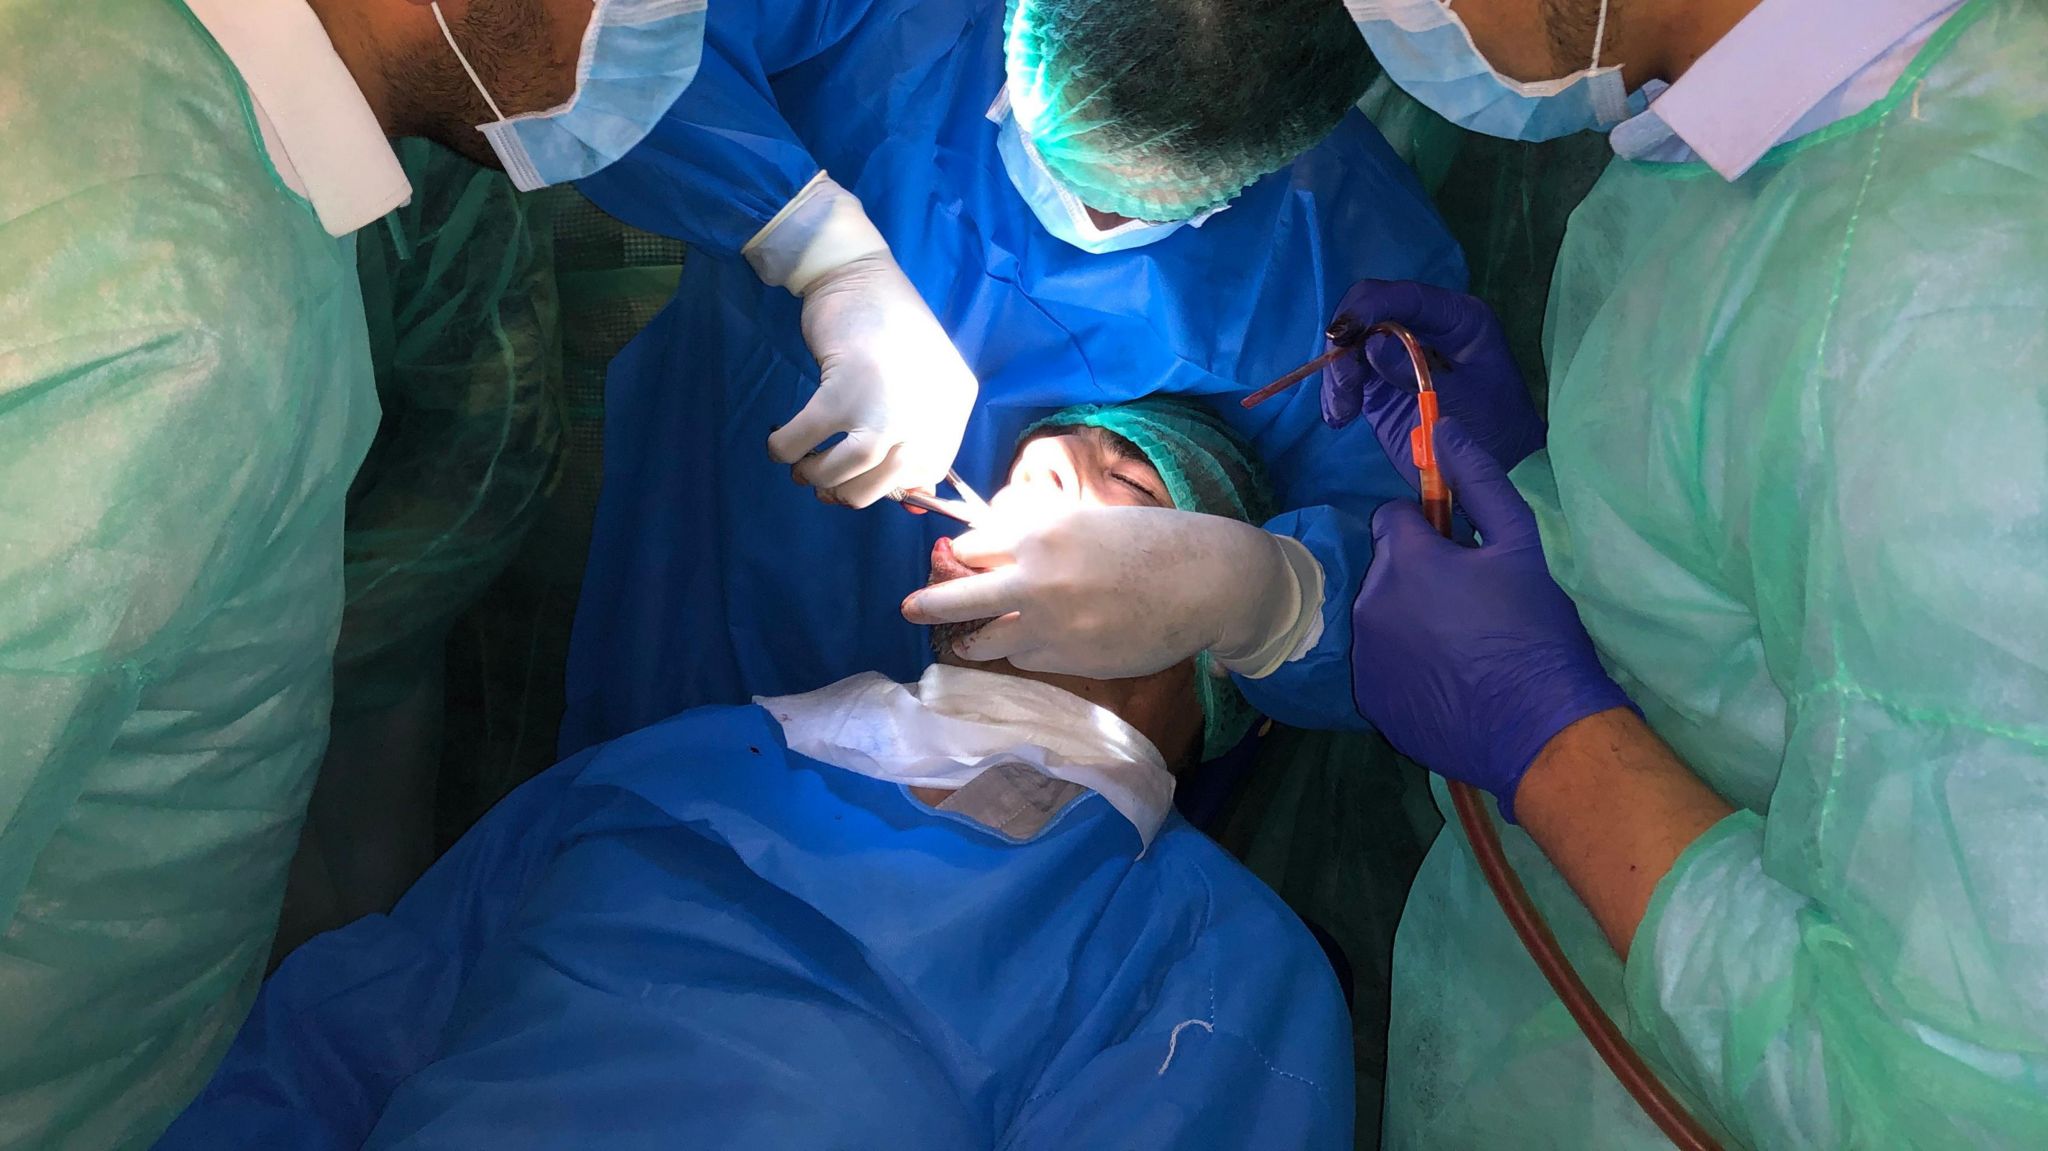 Dentists working on a patient in Afghanistan